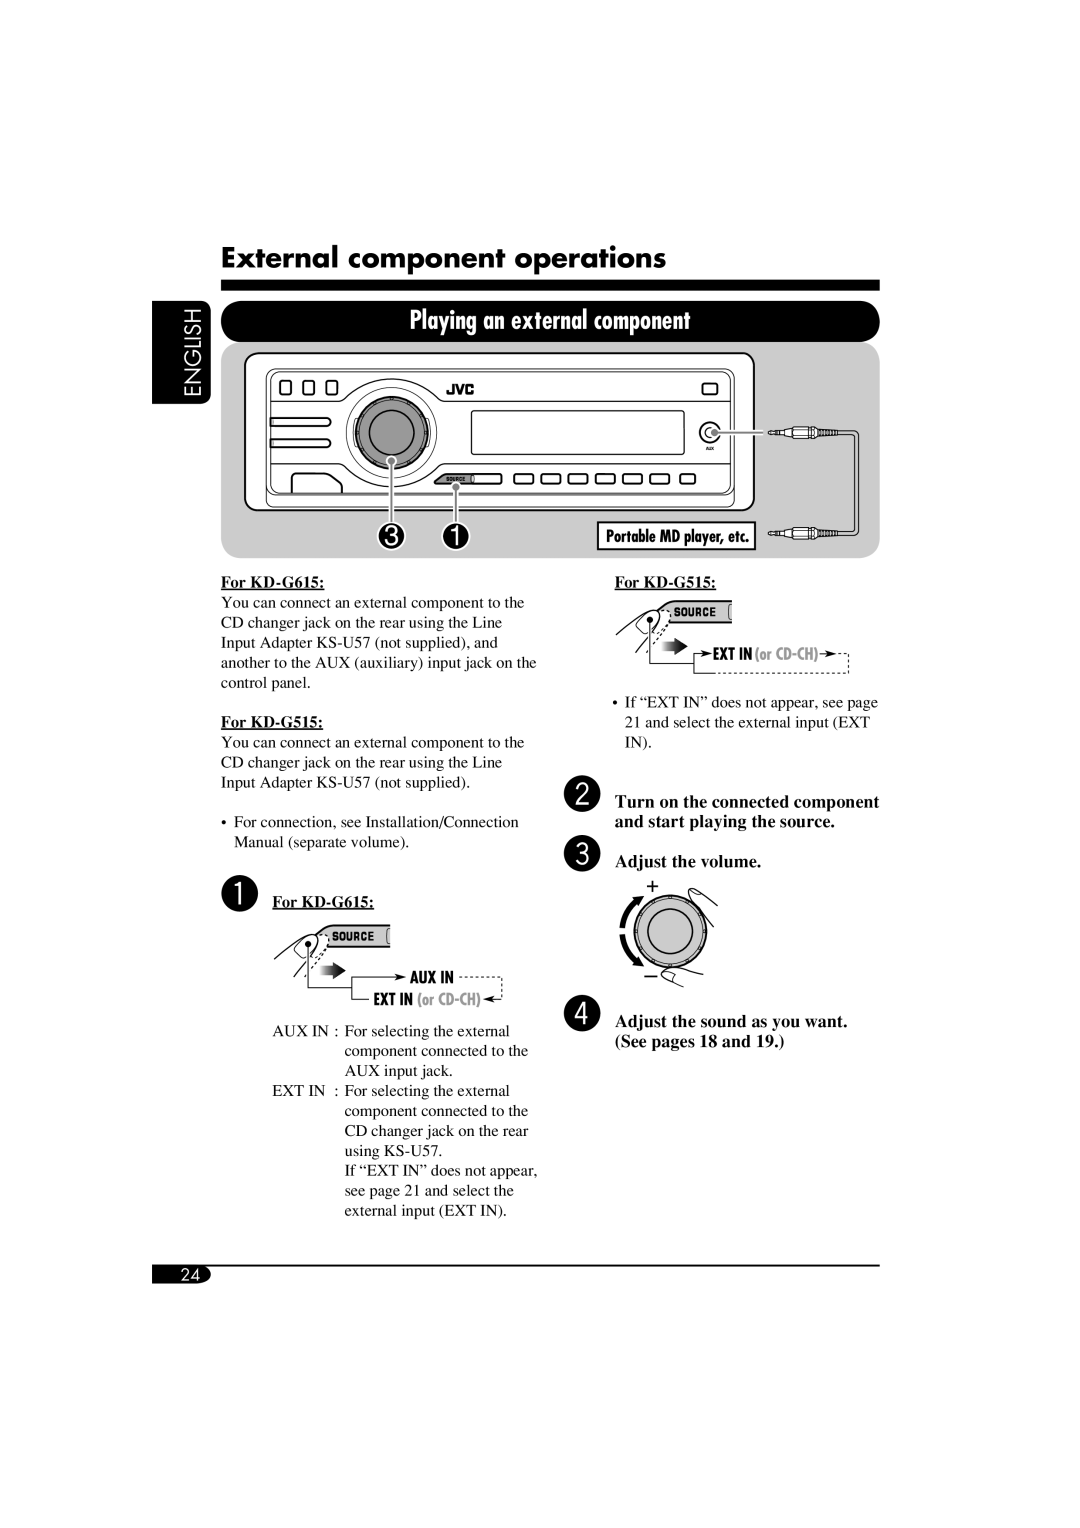 JVC KD-G515 manual External component operations, Playing an external component, English, Adjust the volume, For KD-G615 